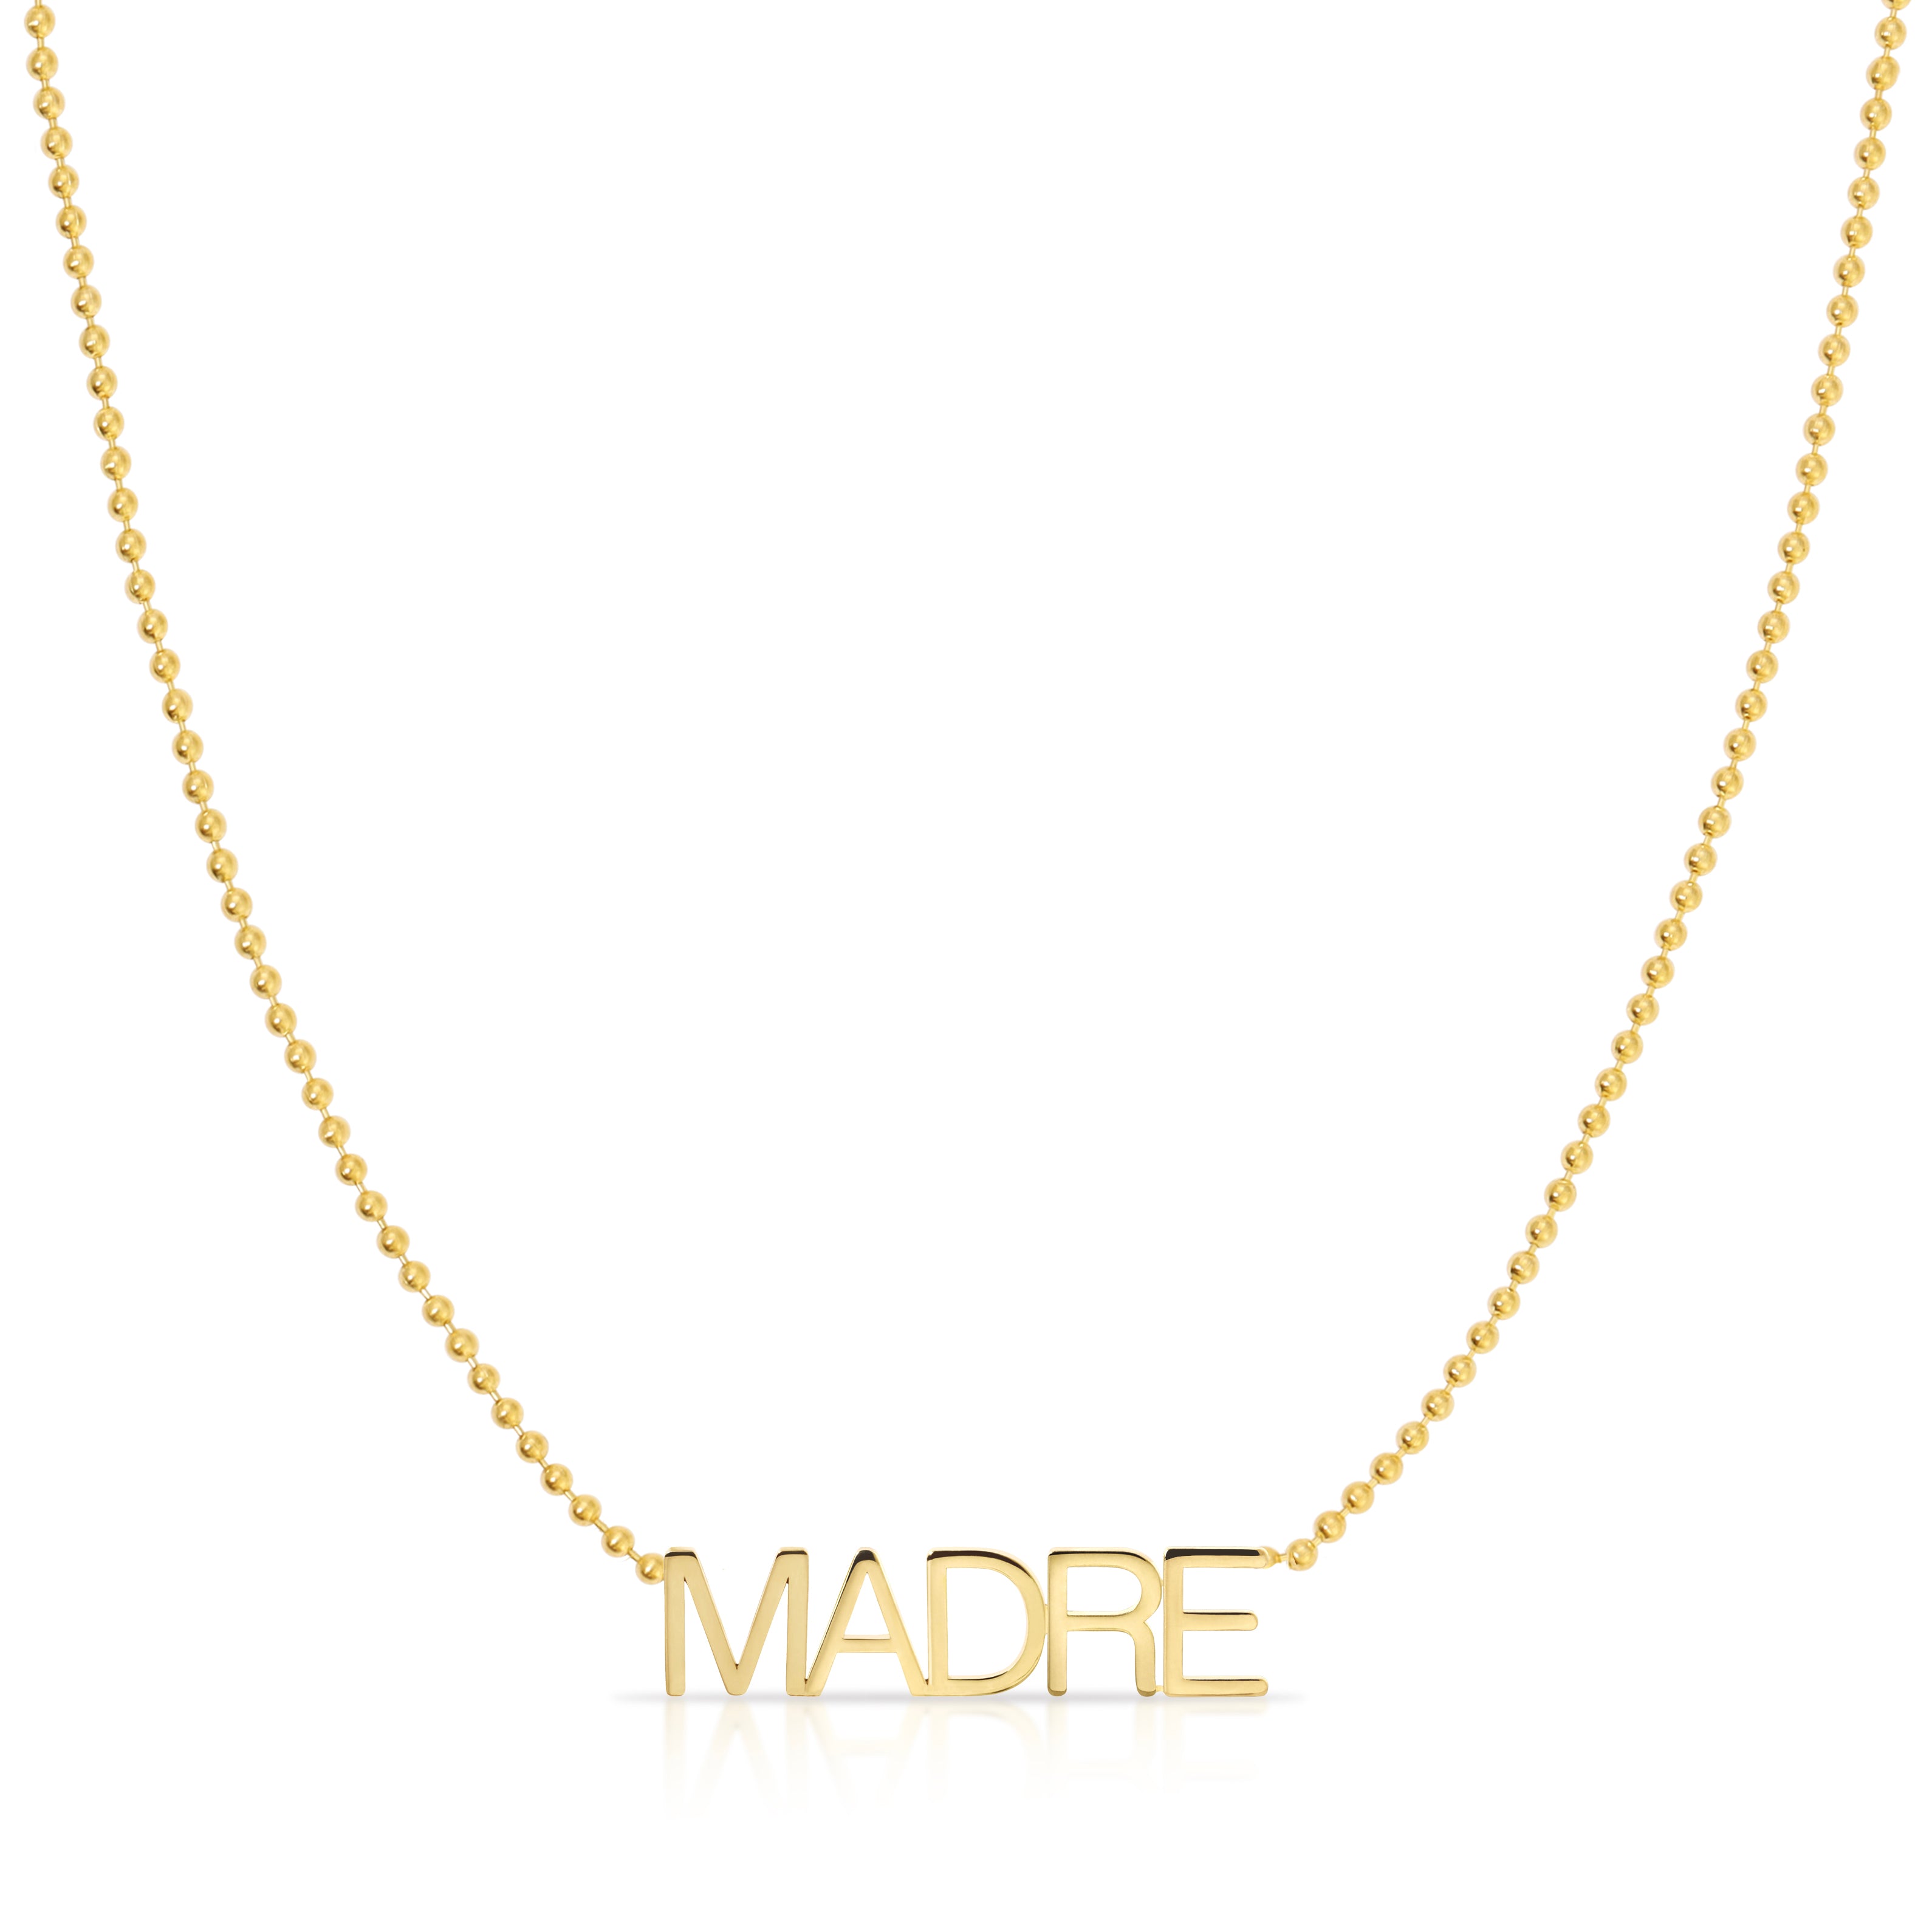 MADRE Necklace